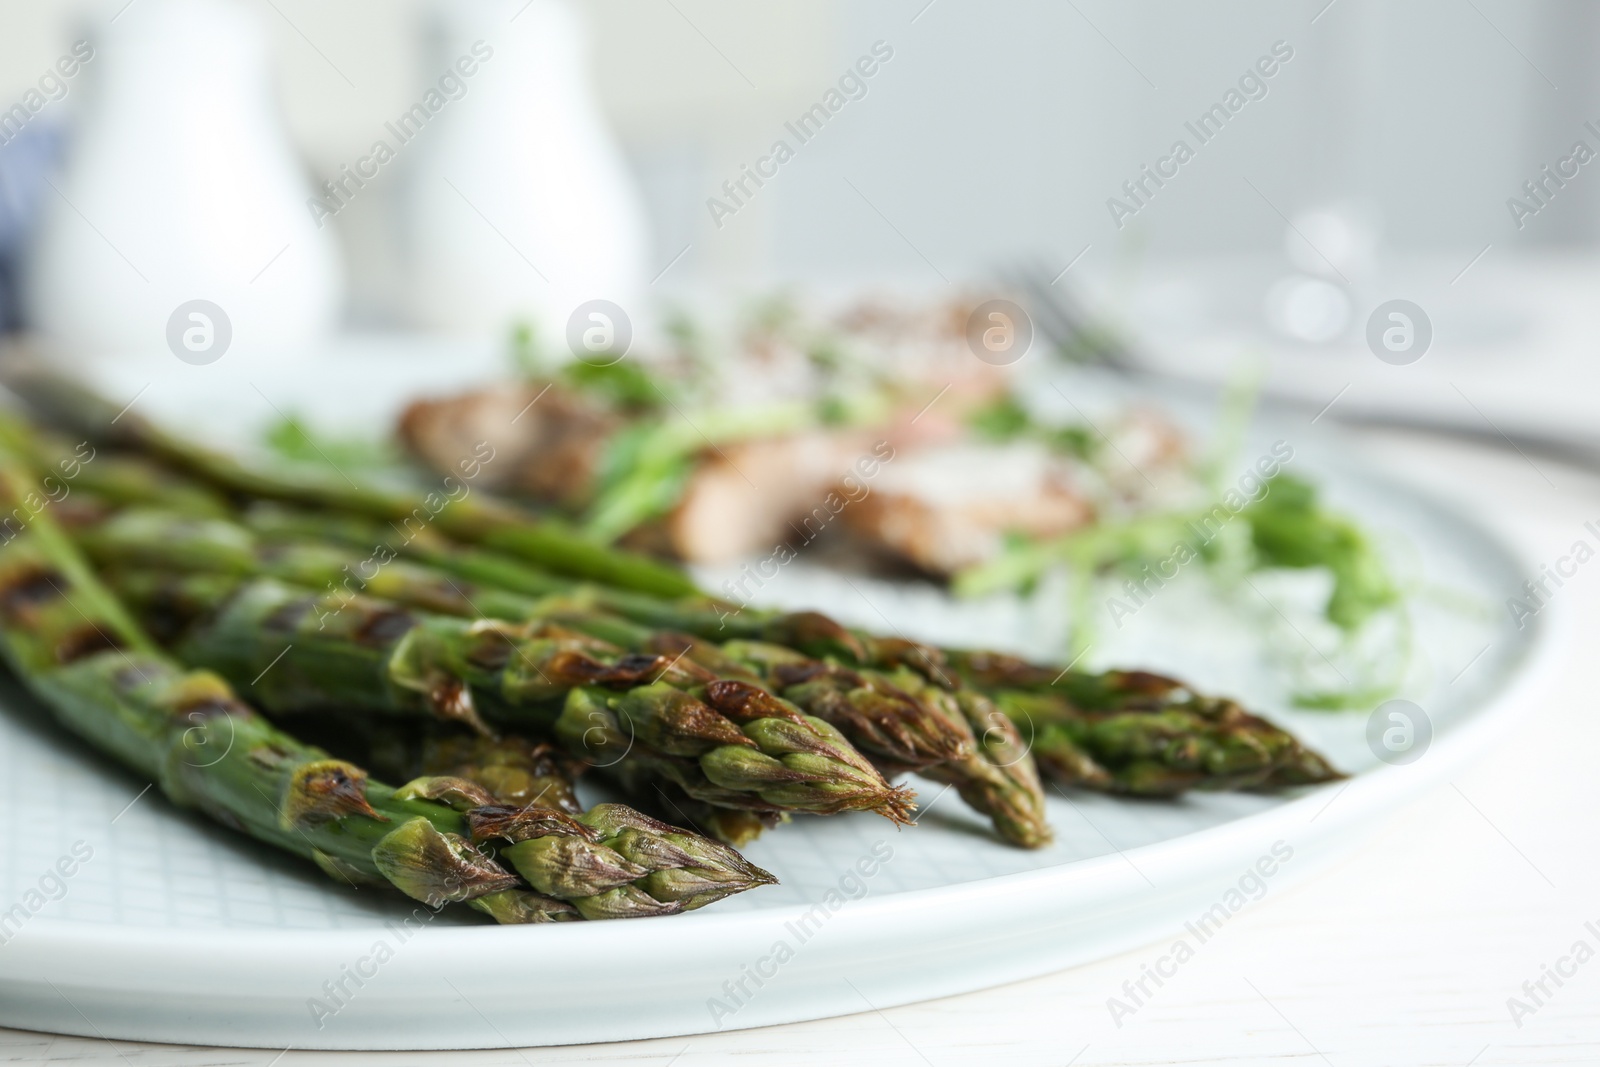 Photo of Tasty grilled asparagus served on plate, closeup